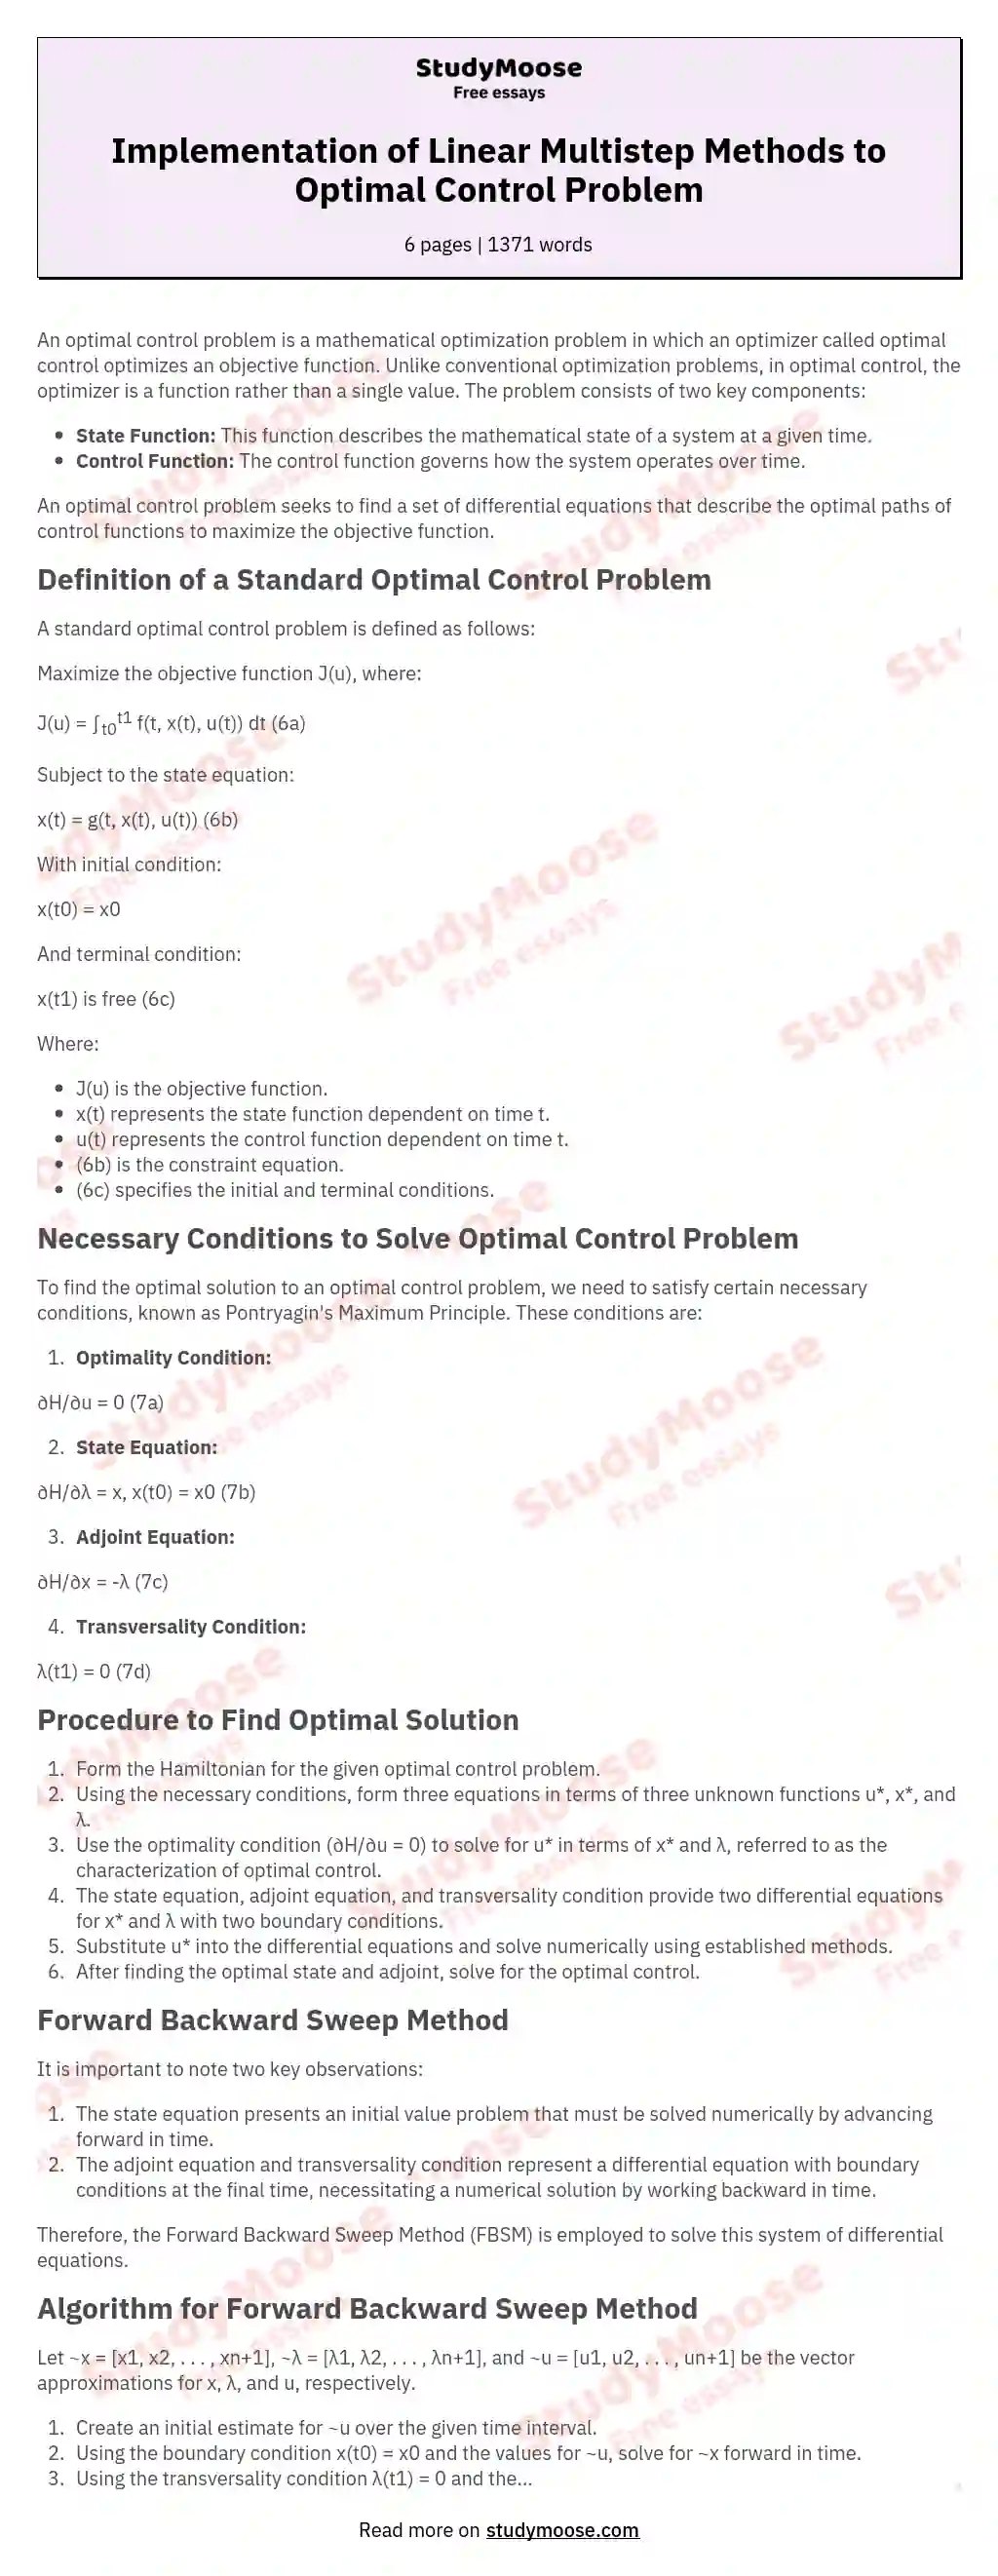 Implementation of Linear Multistep Methods to Optimal Control Problem essay